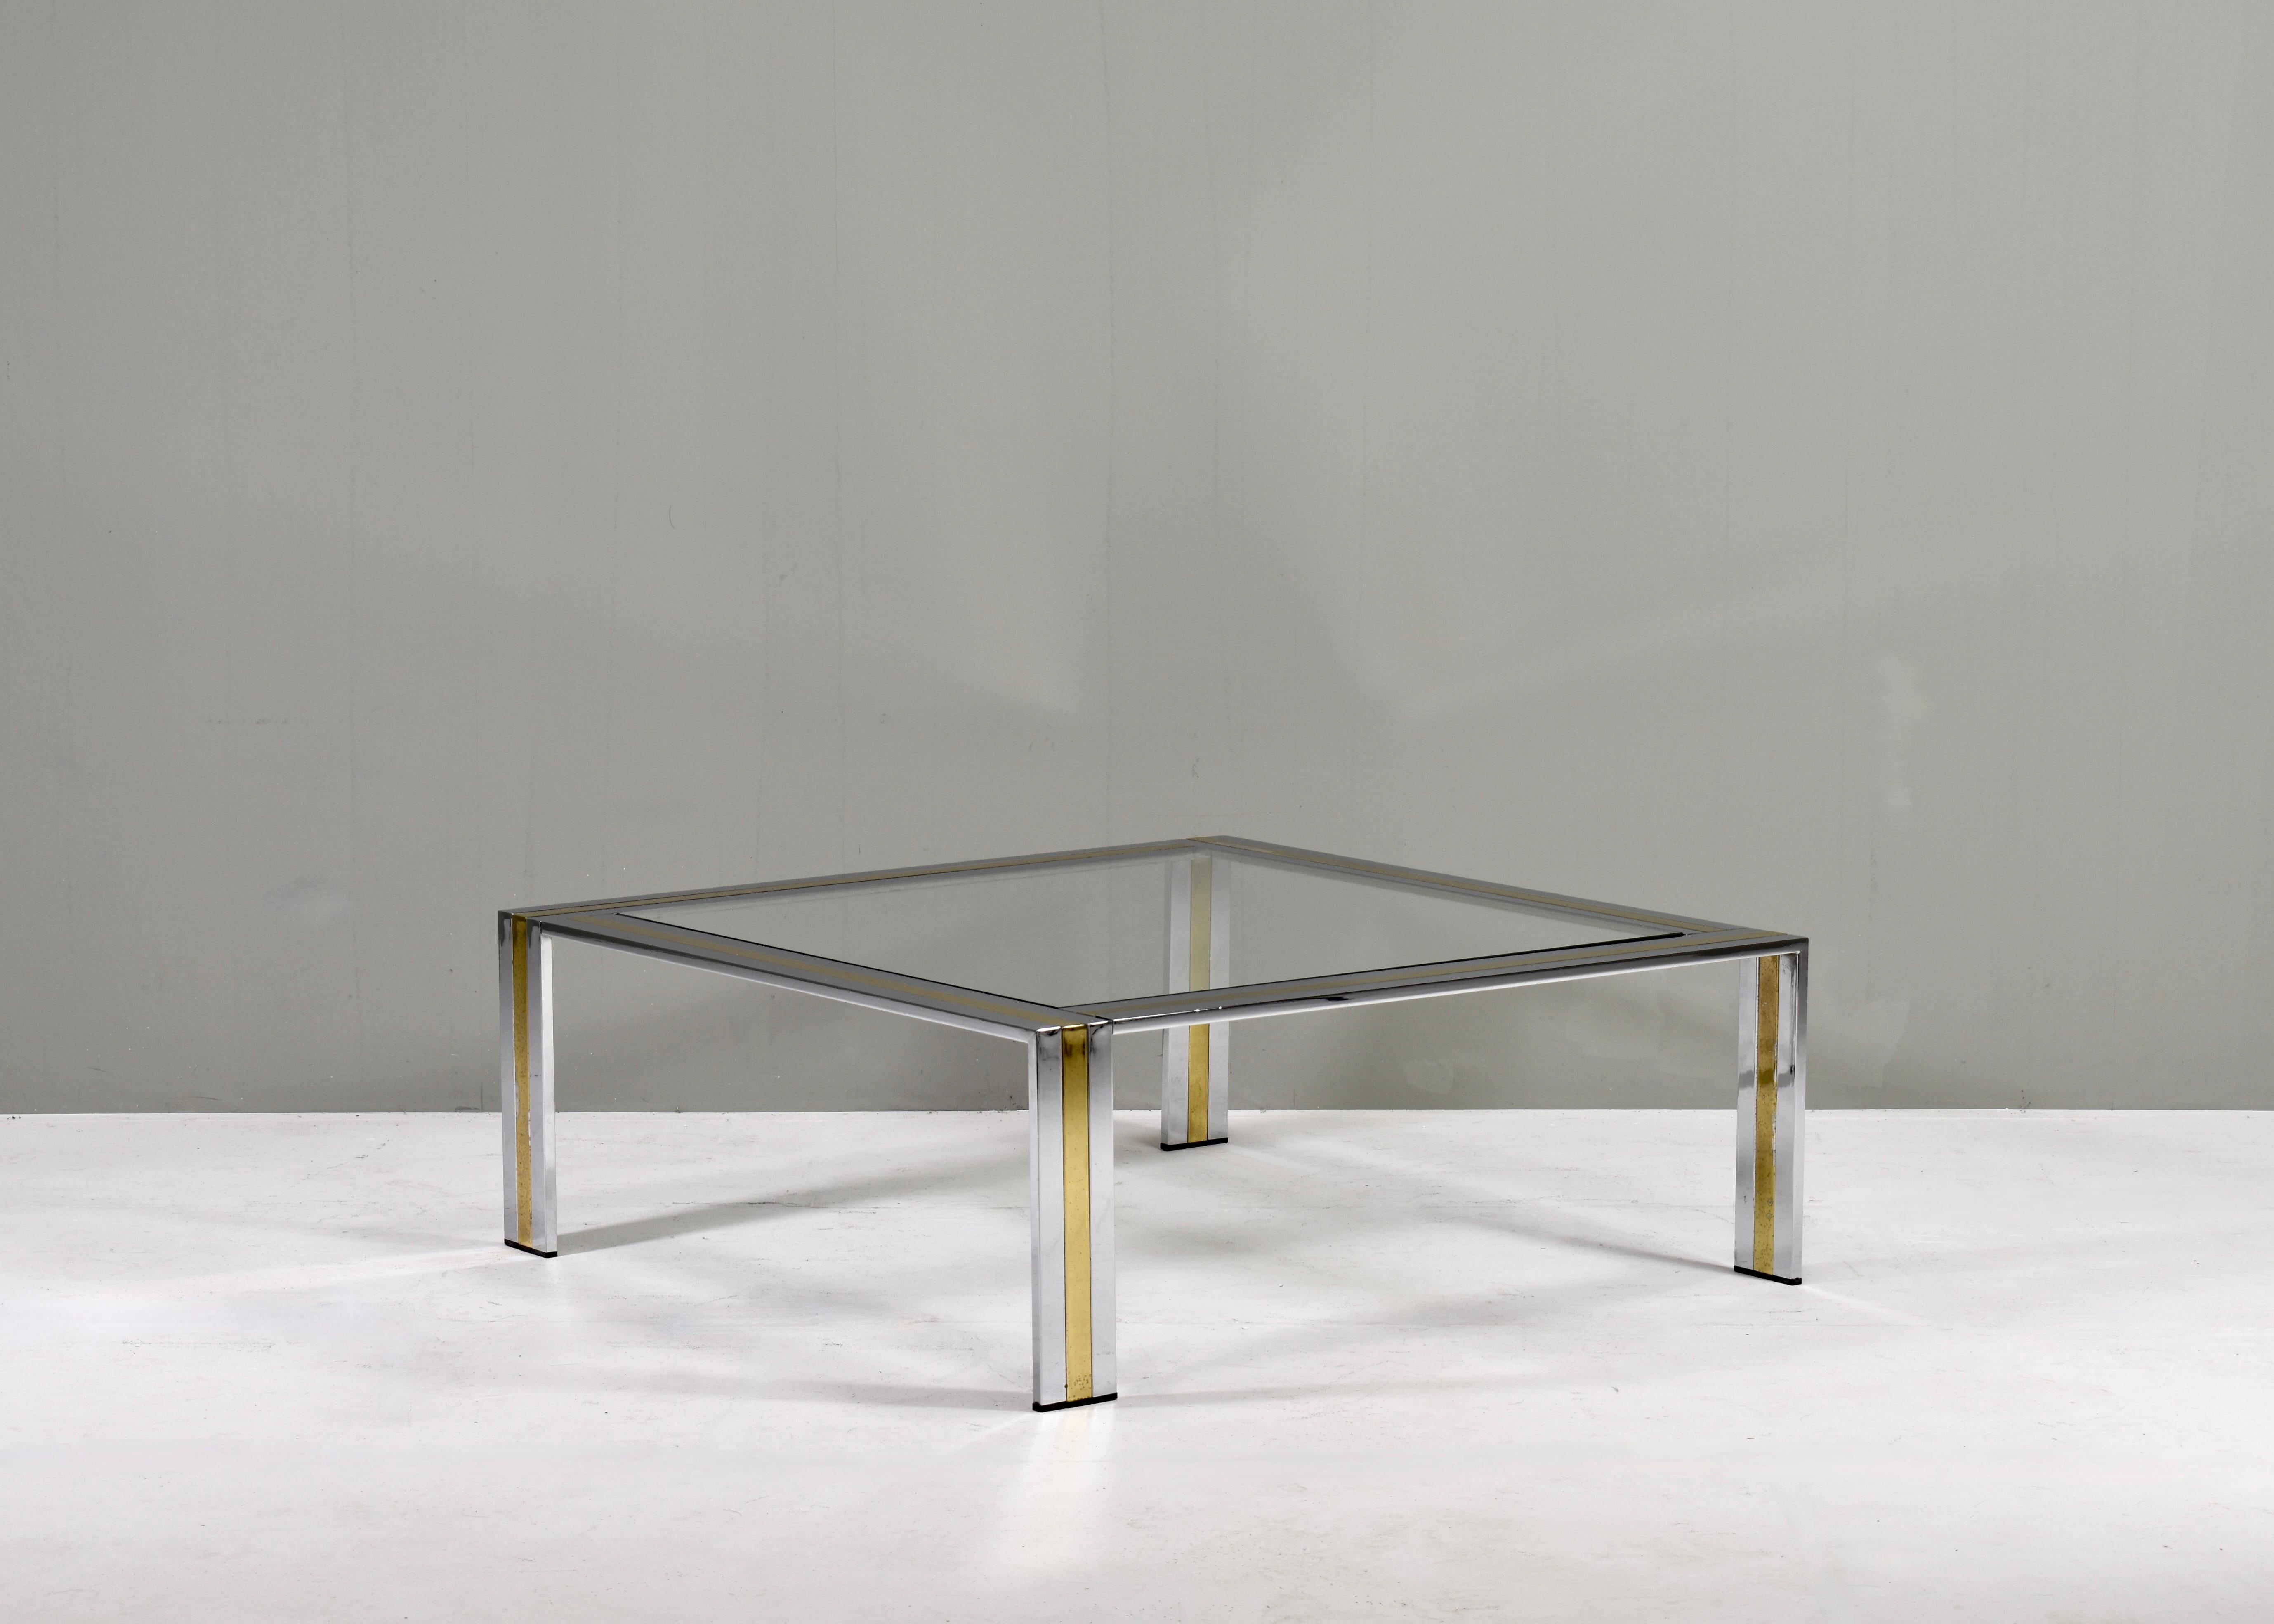 Hollywood Regency Renato Zevi Square Coffee Table in Brass Chrome and Glass, Italy, circa 1970 For Sale